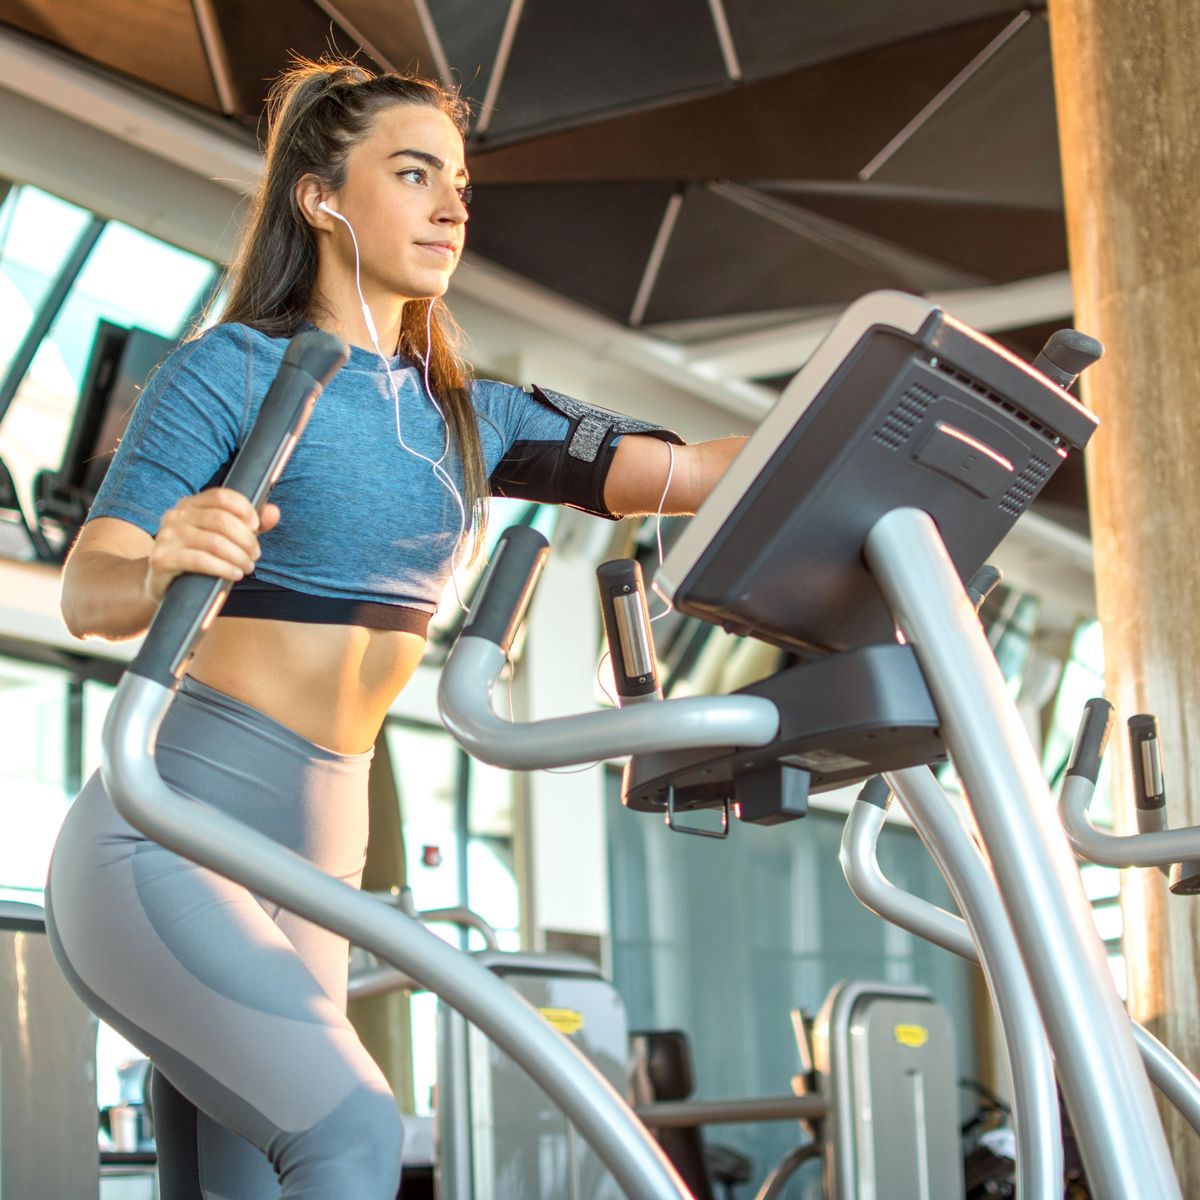 Trainers: 7 Gym Machines That Build Muscle, Good for Beginners